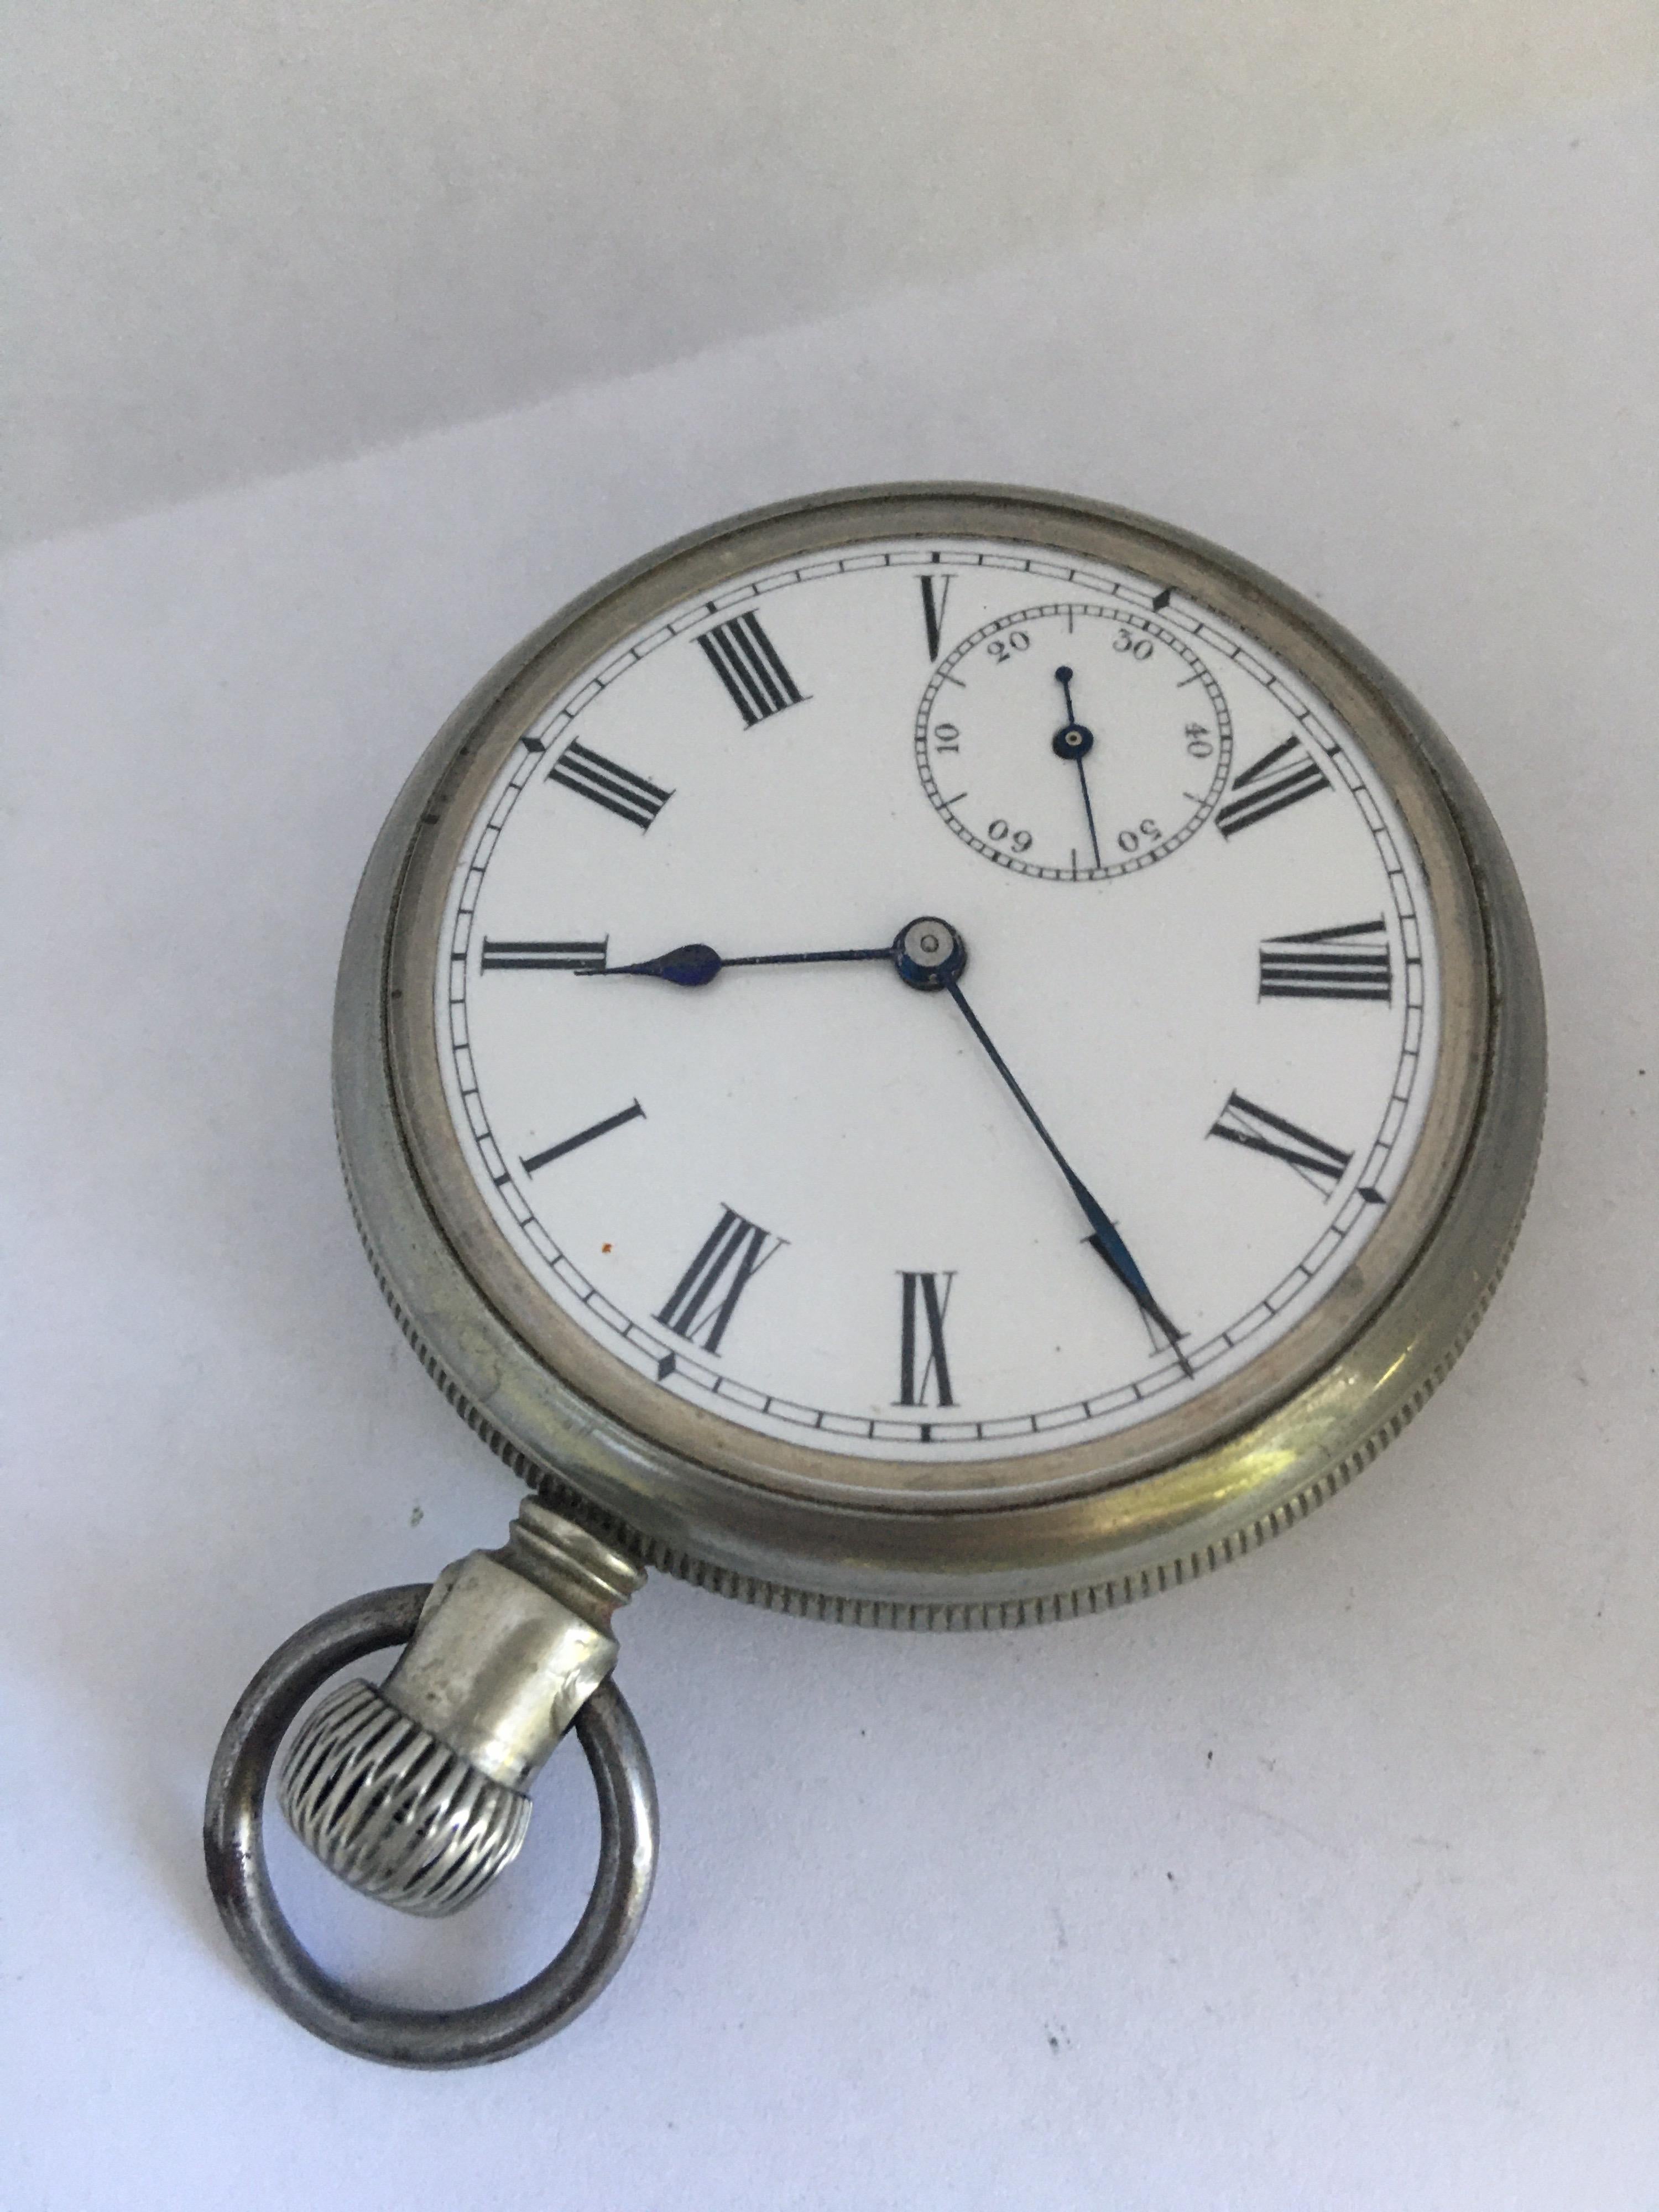 This pre-owned antique watch is in good working condition and it is recently been serviced. Visible signs of ageing and gentle used with light scratches on the watch case. Some tarnished on the loop or metal ring as shown.

Please study the images